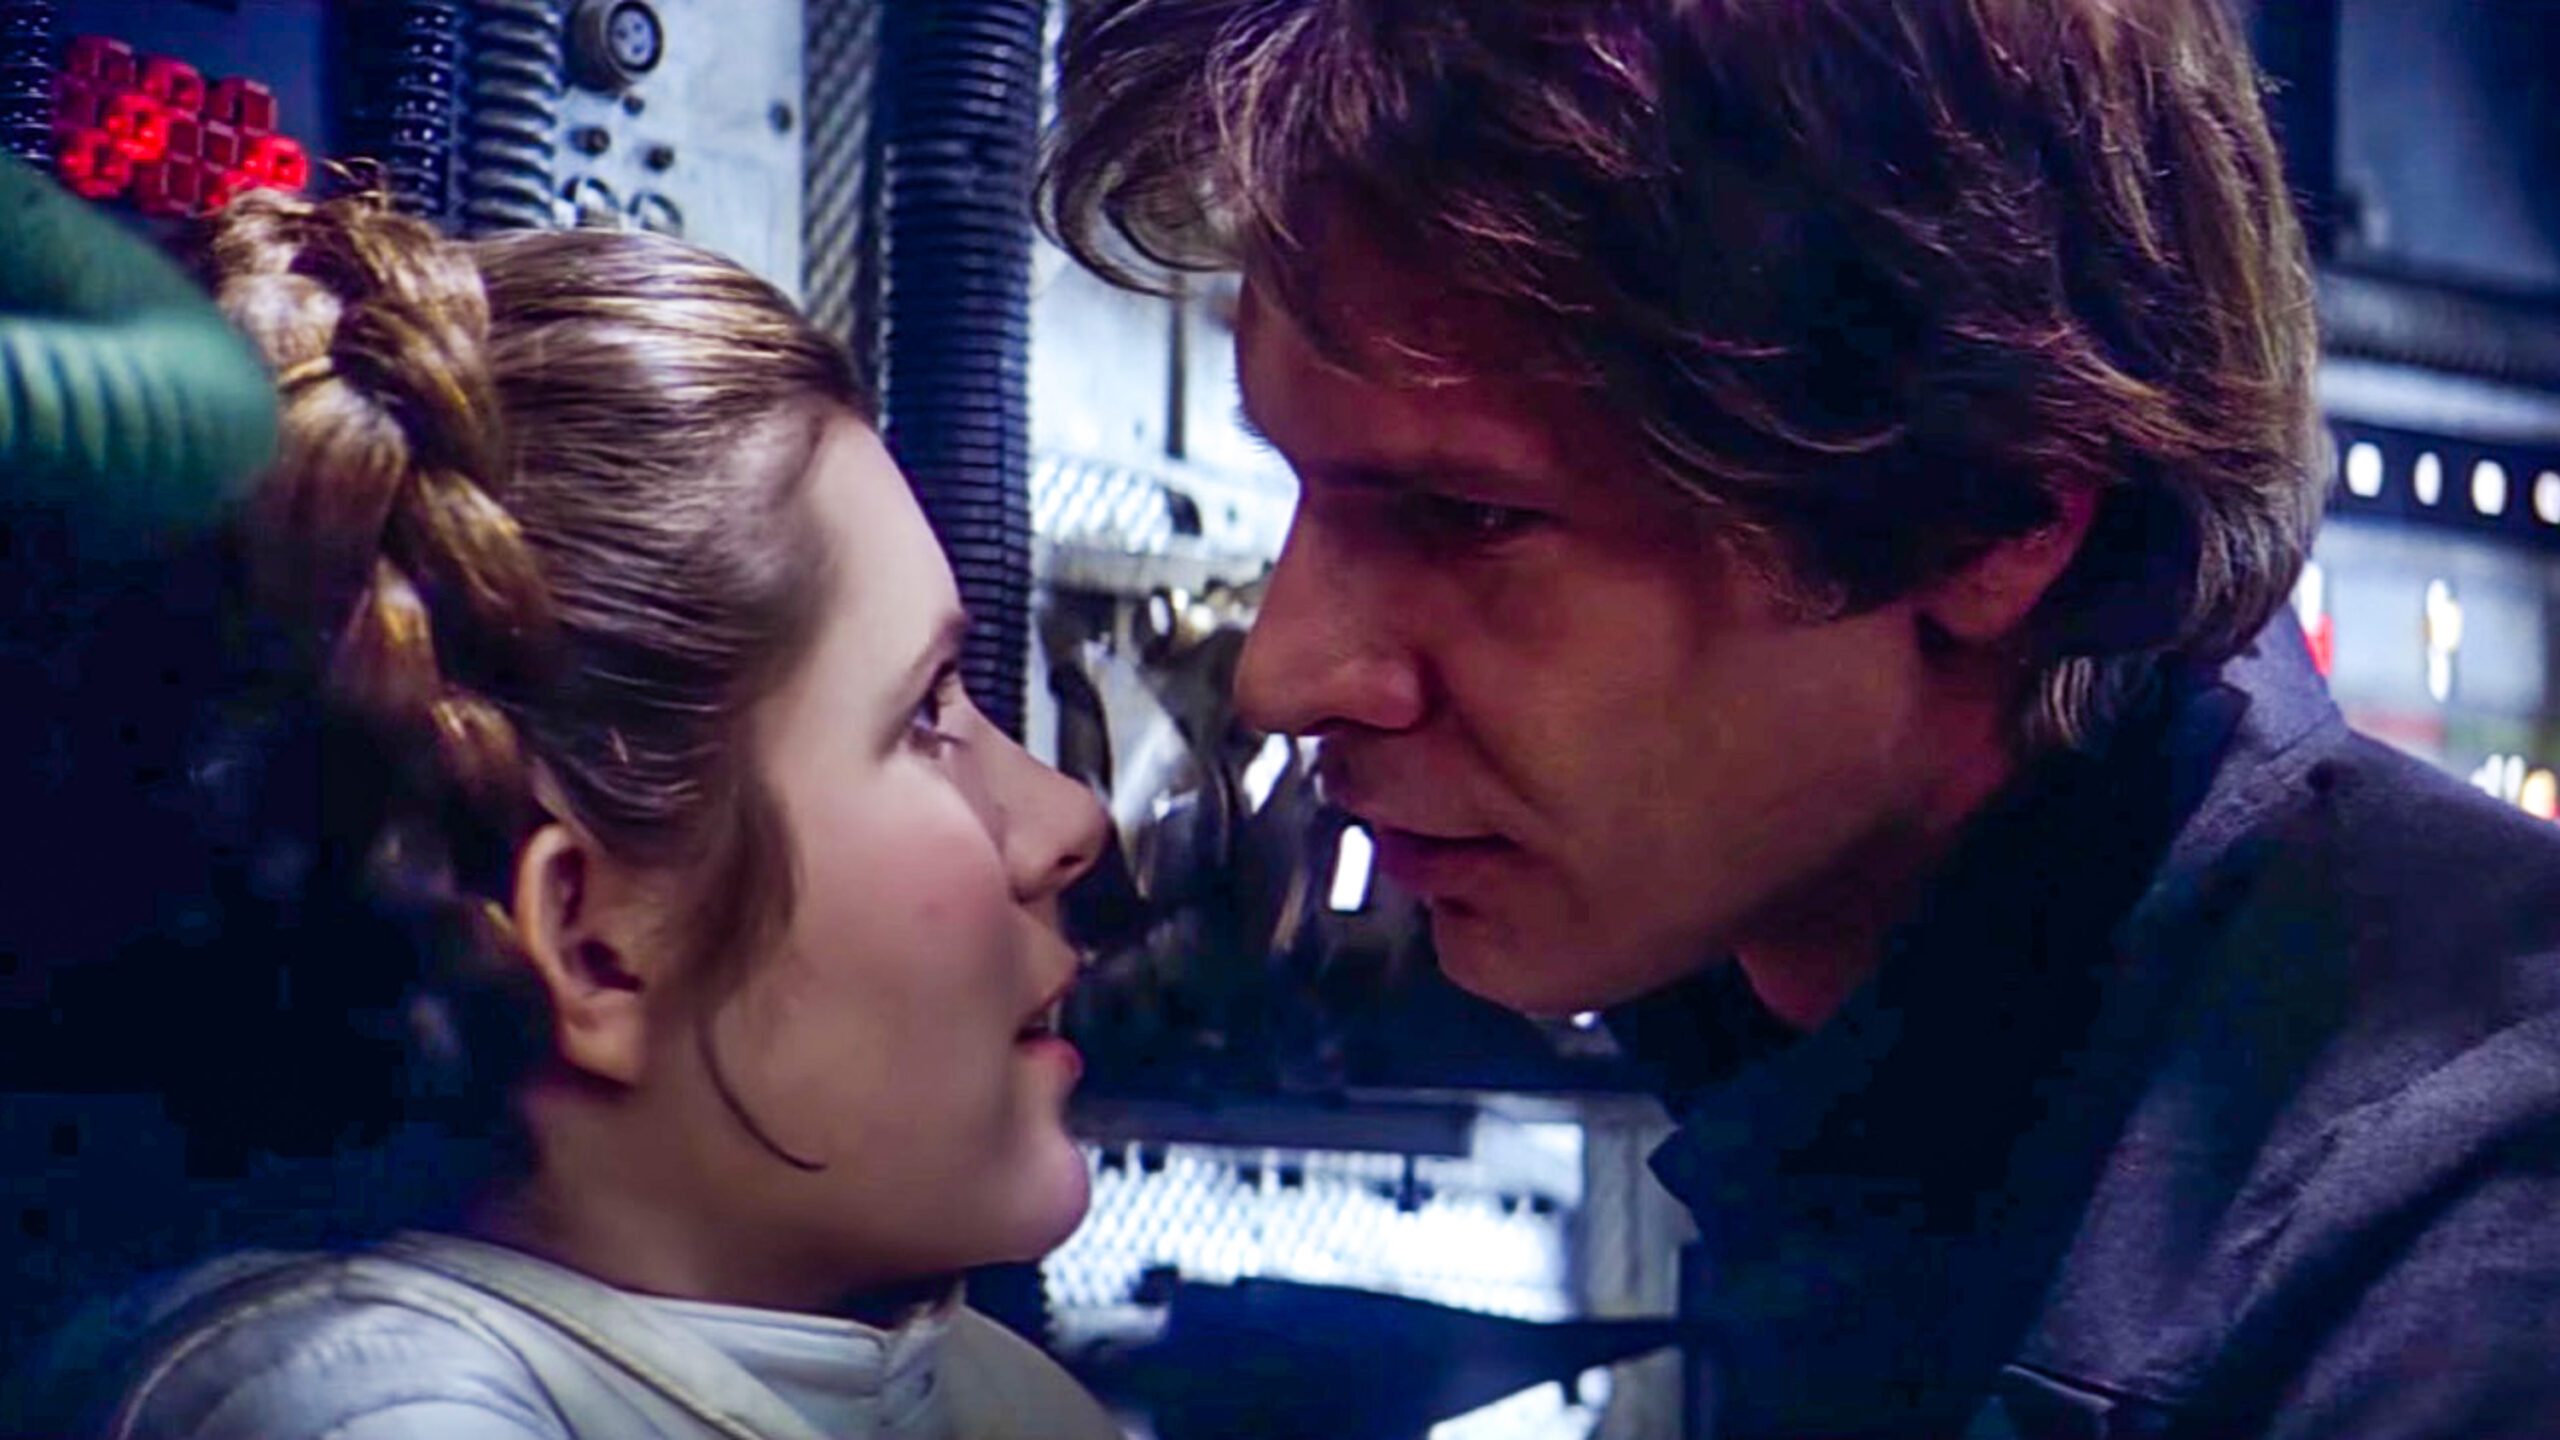 Carrie Fisher says she had an affair with Harrison Ford on ‘Star Wars’